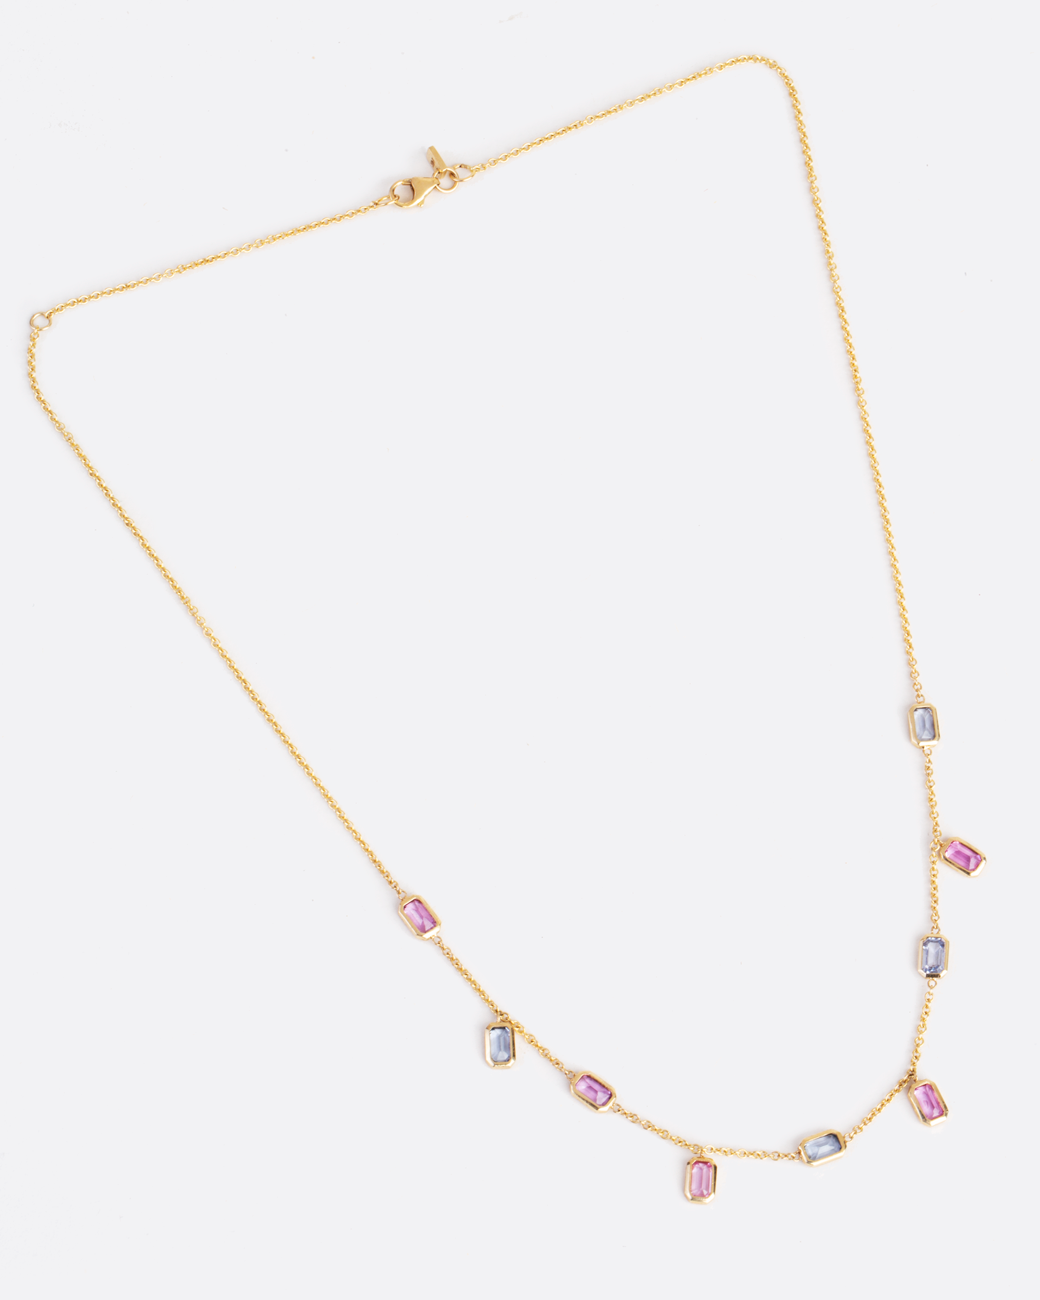 gold chain with 9 emerald cut sapphires set horizontally and vertically along the chain